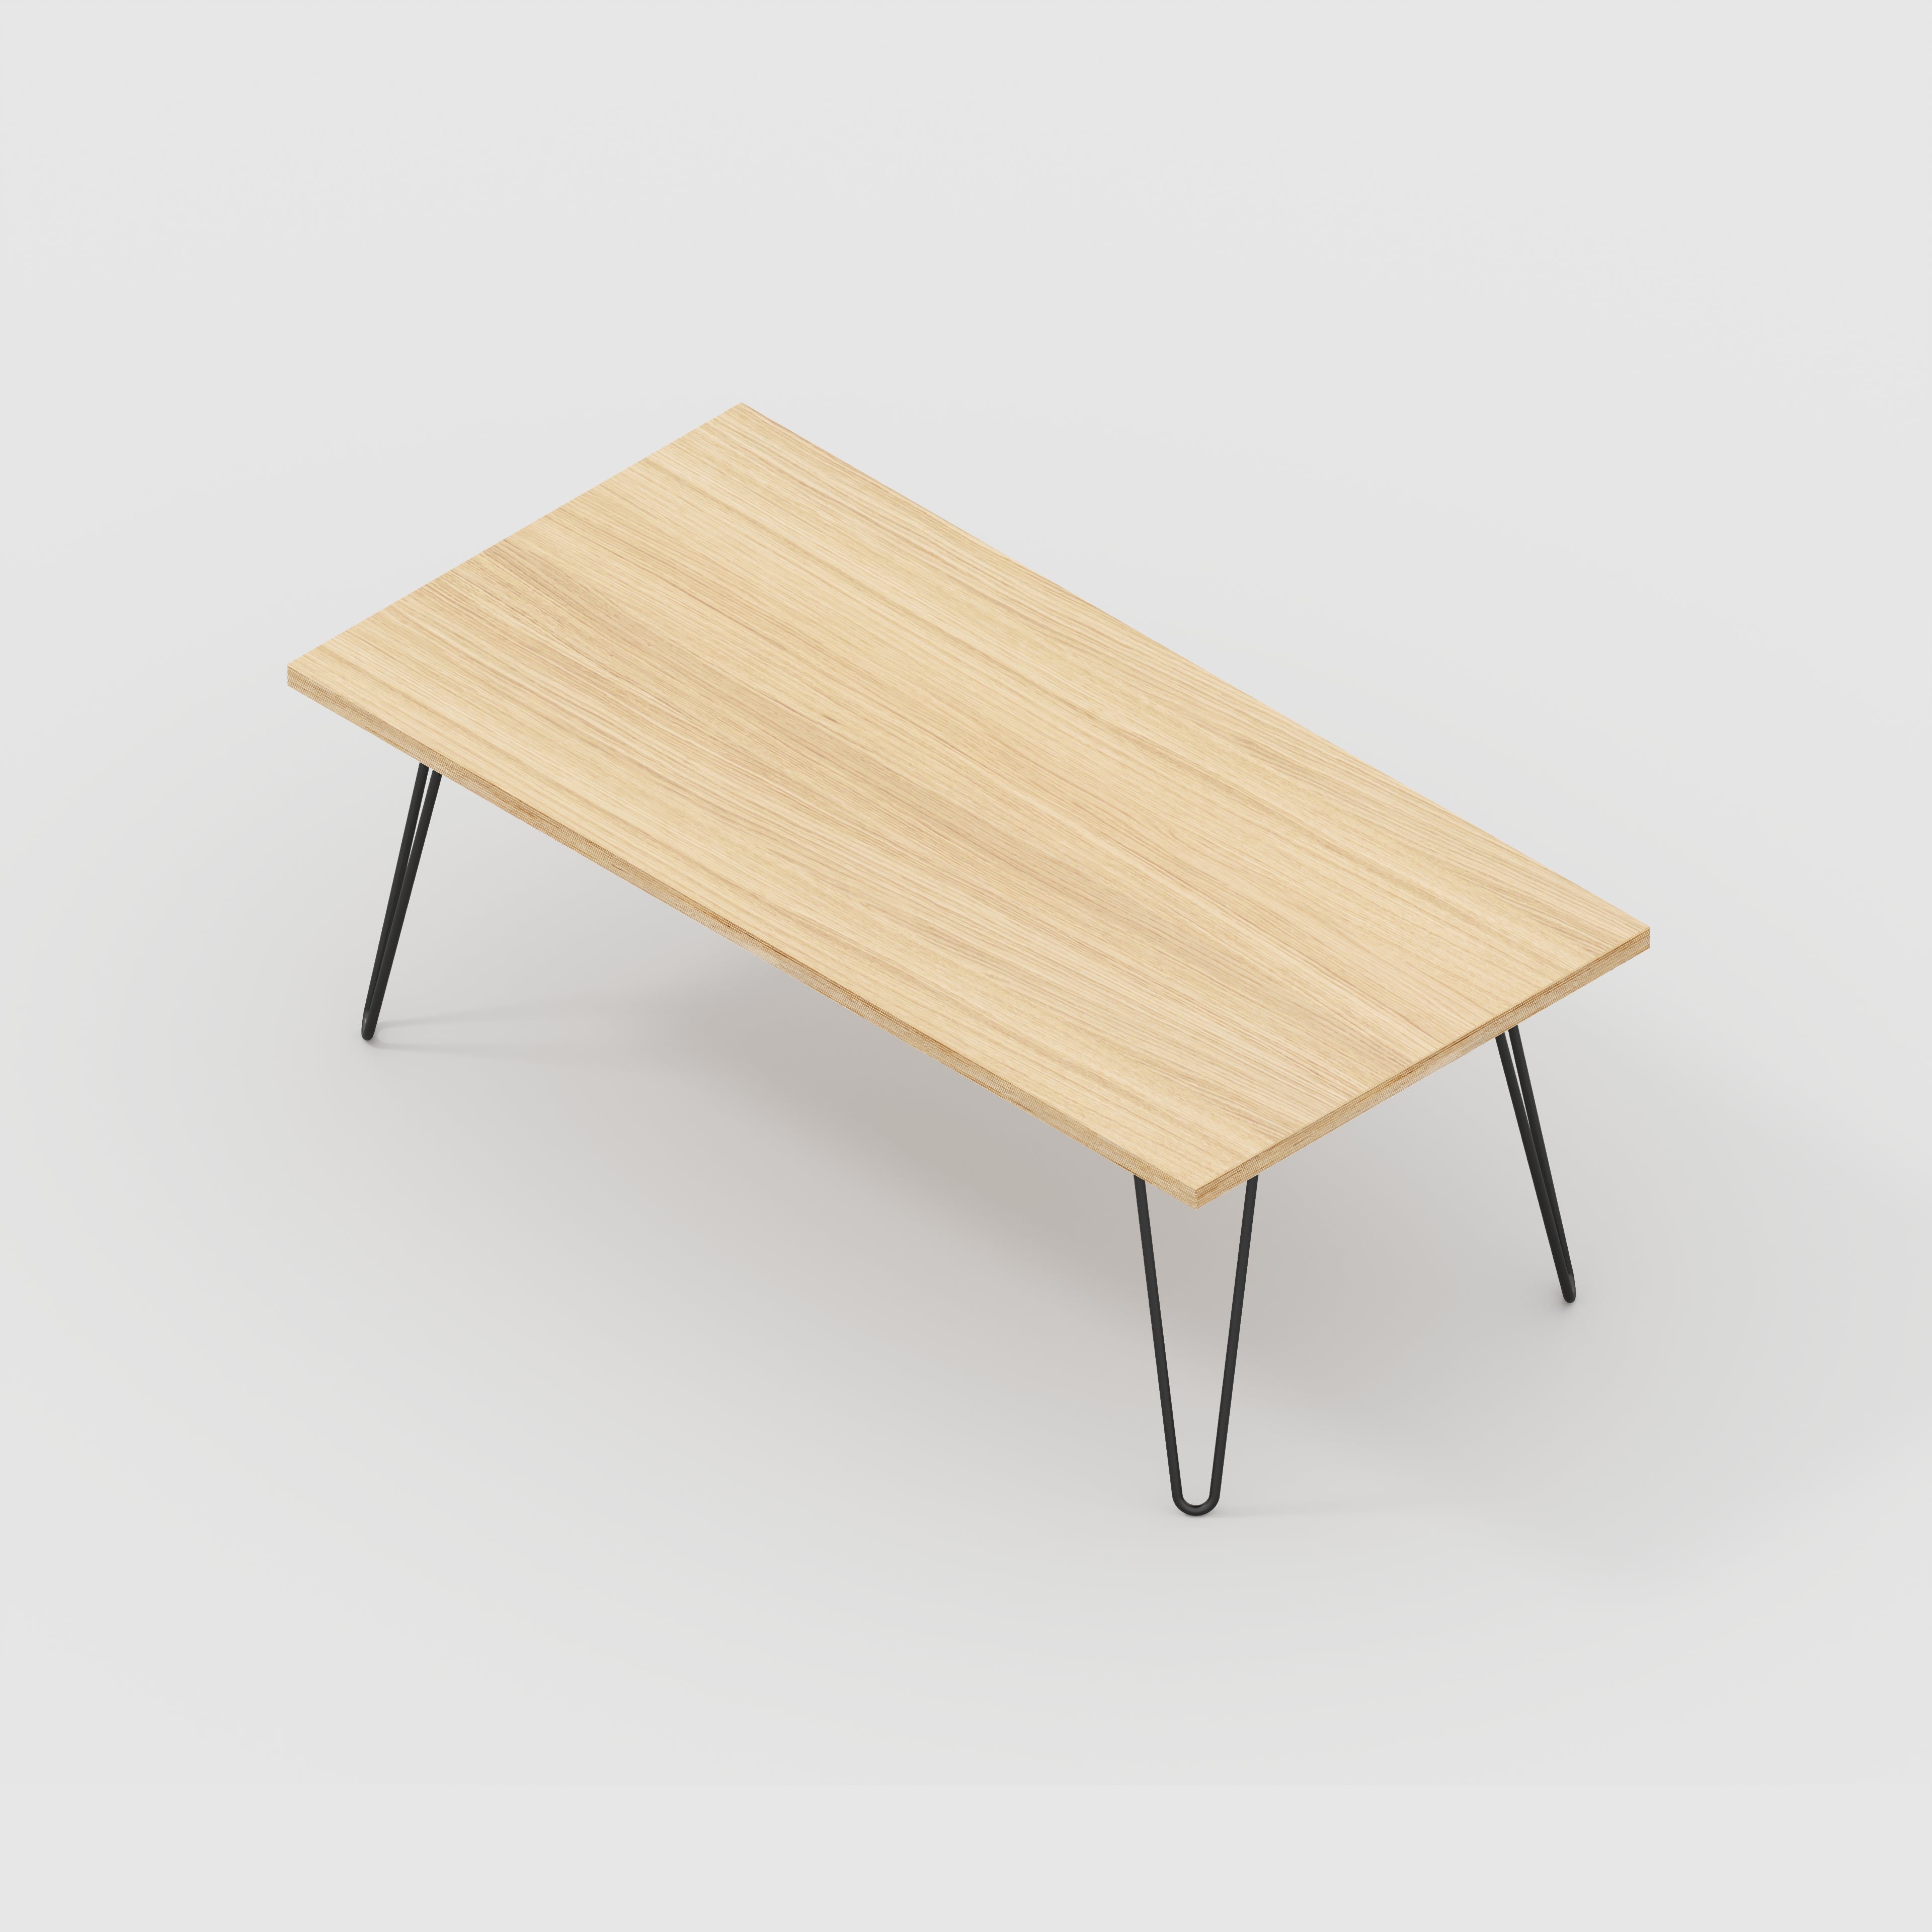 Coffee Table with Black Hairpin Legs - Plywood Oak - 1200(w) x 600(d) x 425(h)